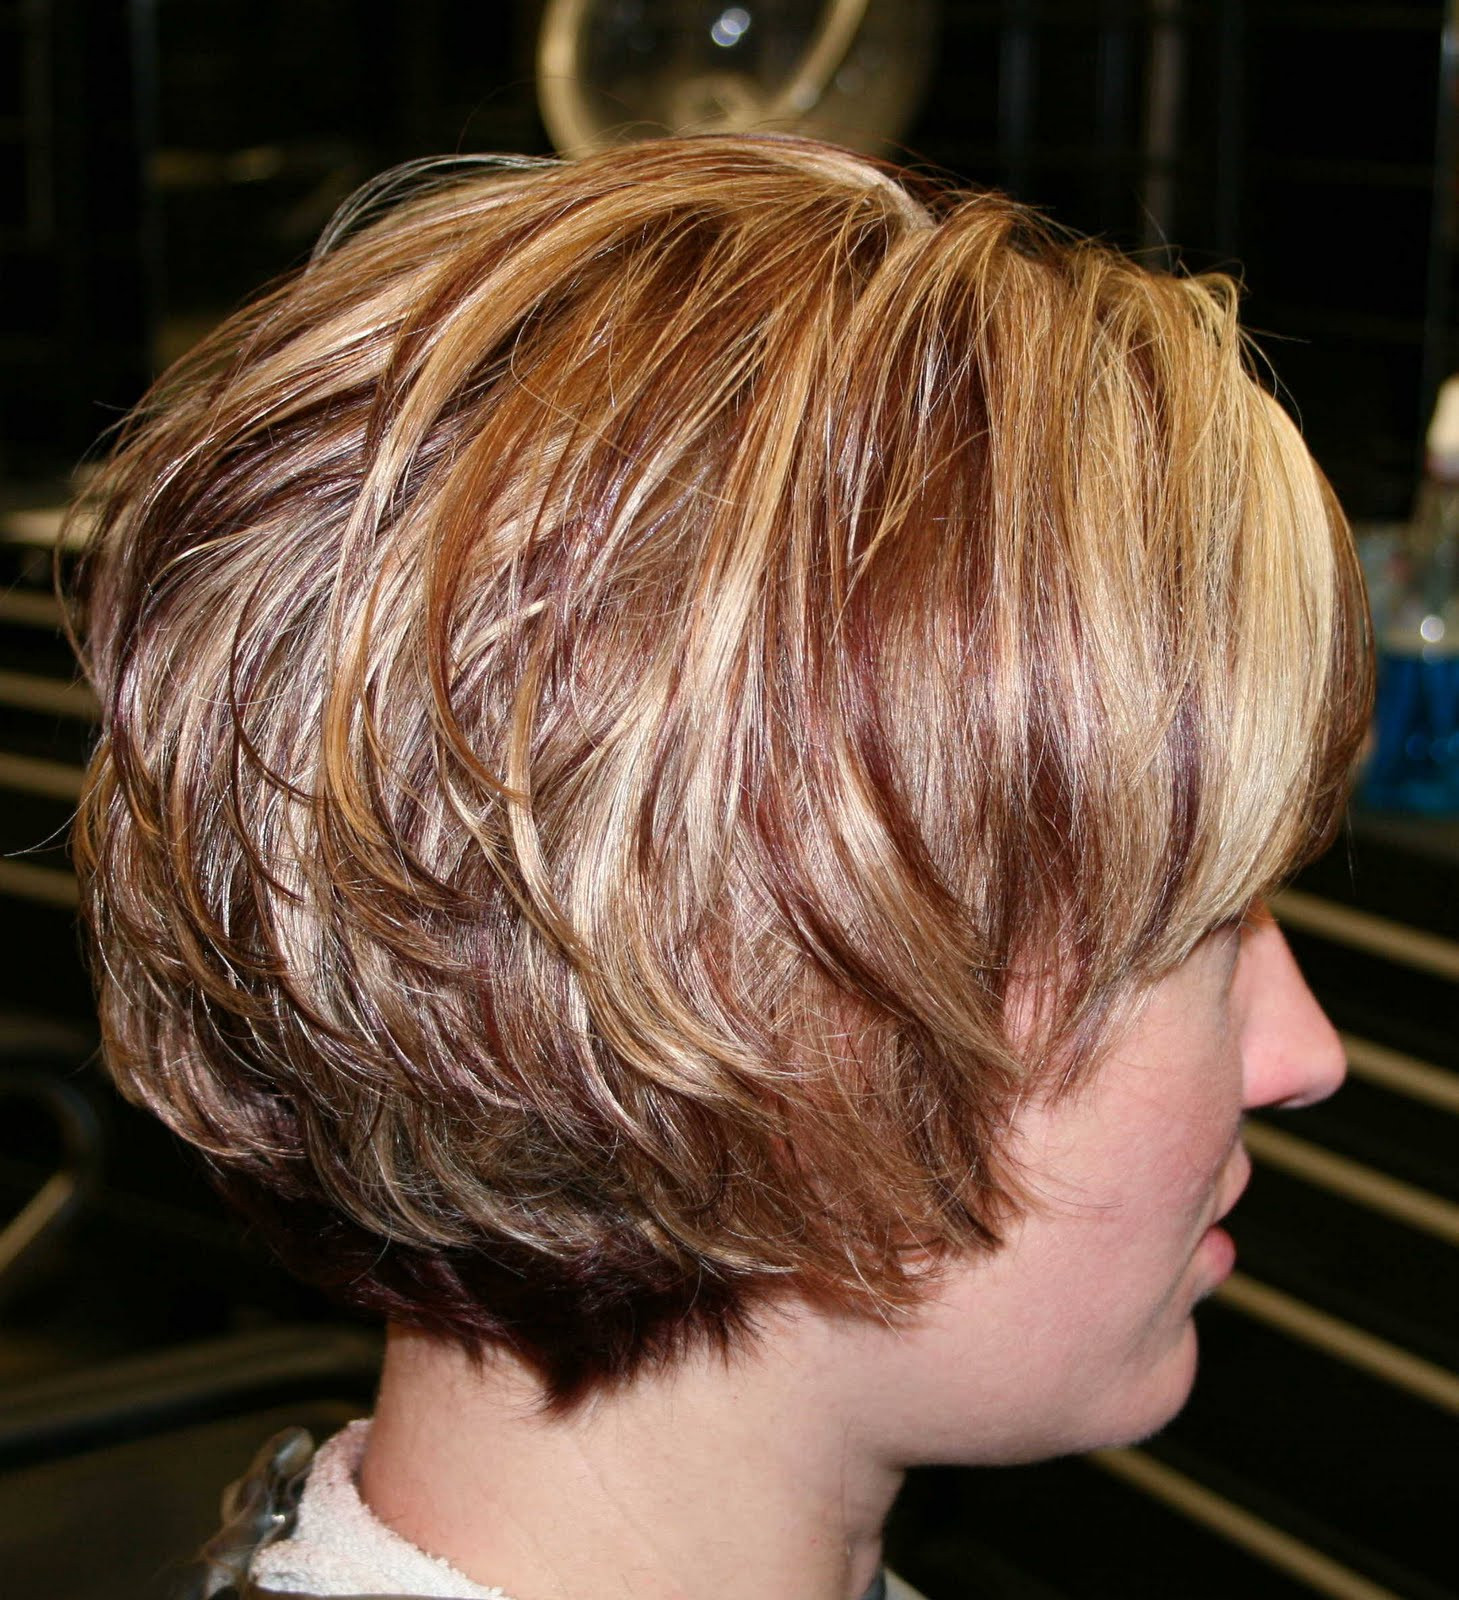 Short Stacked Bob Hairstyles
 Hairstyles Collection Short Stacked Hairstyles